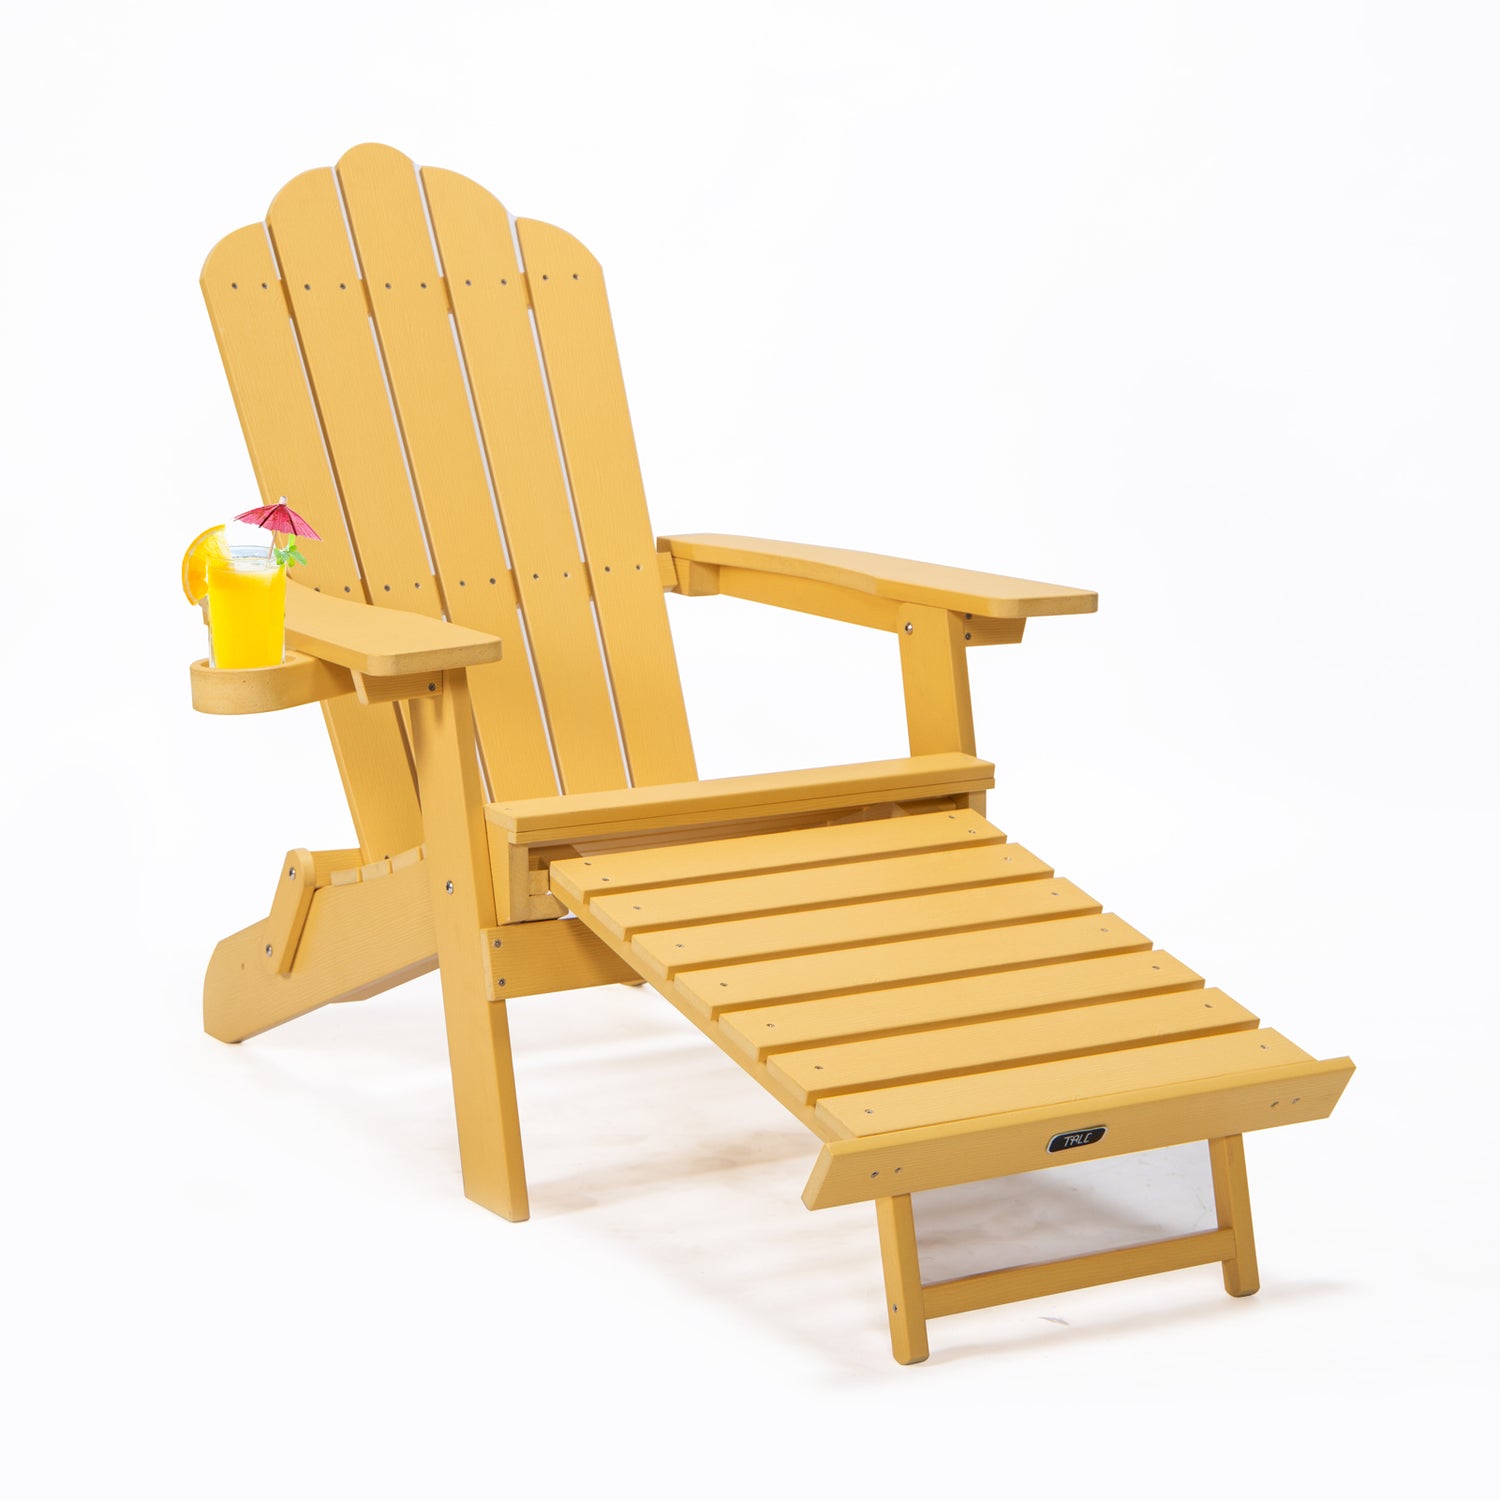 NEW TALE Folding Adirondack Chair With Pullout Ottoman With Cup Holder, Oversized, Poly Lumber,  For Patio Deck Garden, Backyard Furniture, Easy To Install,.Banned From Selling On Amazon